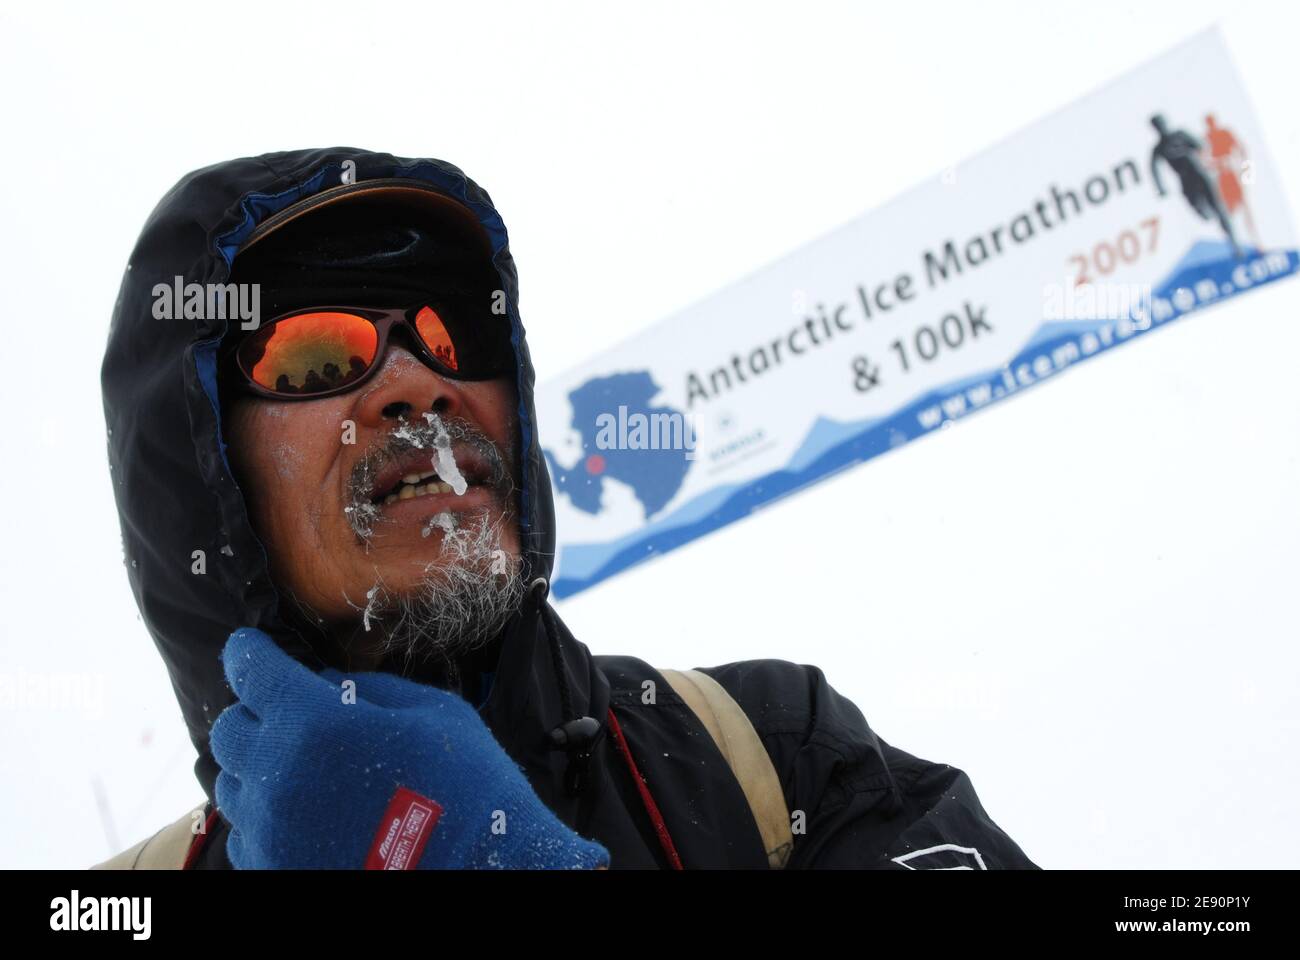 Antarctic Ice Marathon & 100k 2007, From 8 till 23 December 2007, from Punta Arenas (Chile) to Patriot Hills (Antarctic). Seen here is Japan's Toshio Ohmori: 12th place with 7:22:12 hrs. The Antarctic was marathon number 135 for this 67-year old, who ran his first marathon in Melbourne in 1987 at the age of 47. In addition to his 135 marathons, Toshio has run a similar number of ultramarathon distances. For the past couple of years, he has developed an interest in desert and mountain races in particular. Having worked for a Swedish company for over 30 years, Toshio retired at the age of 61 . P Stock Photo